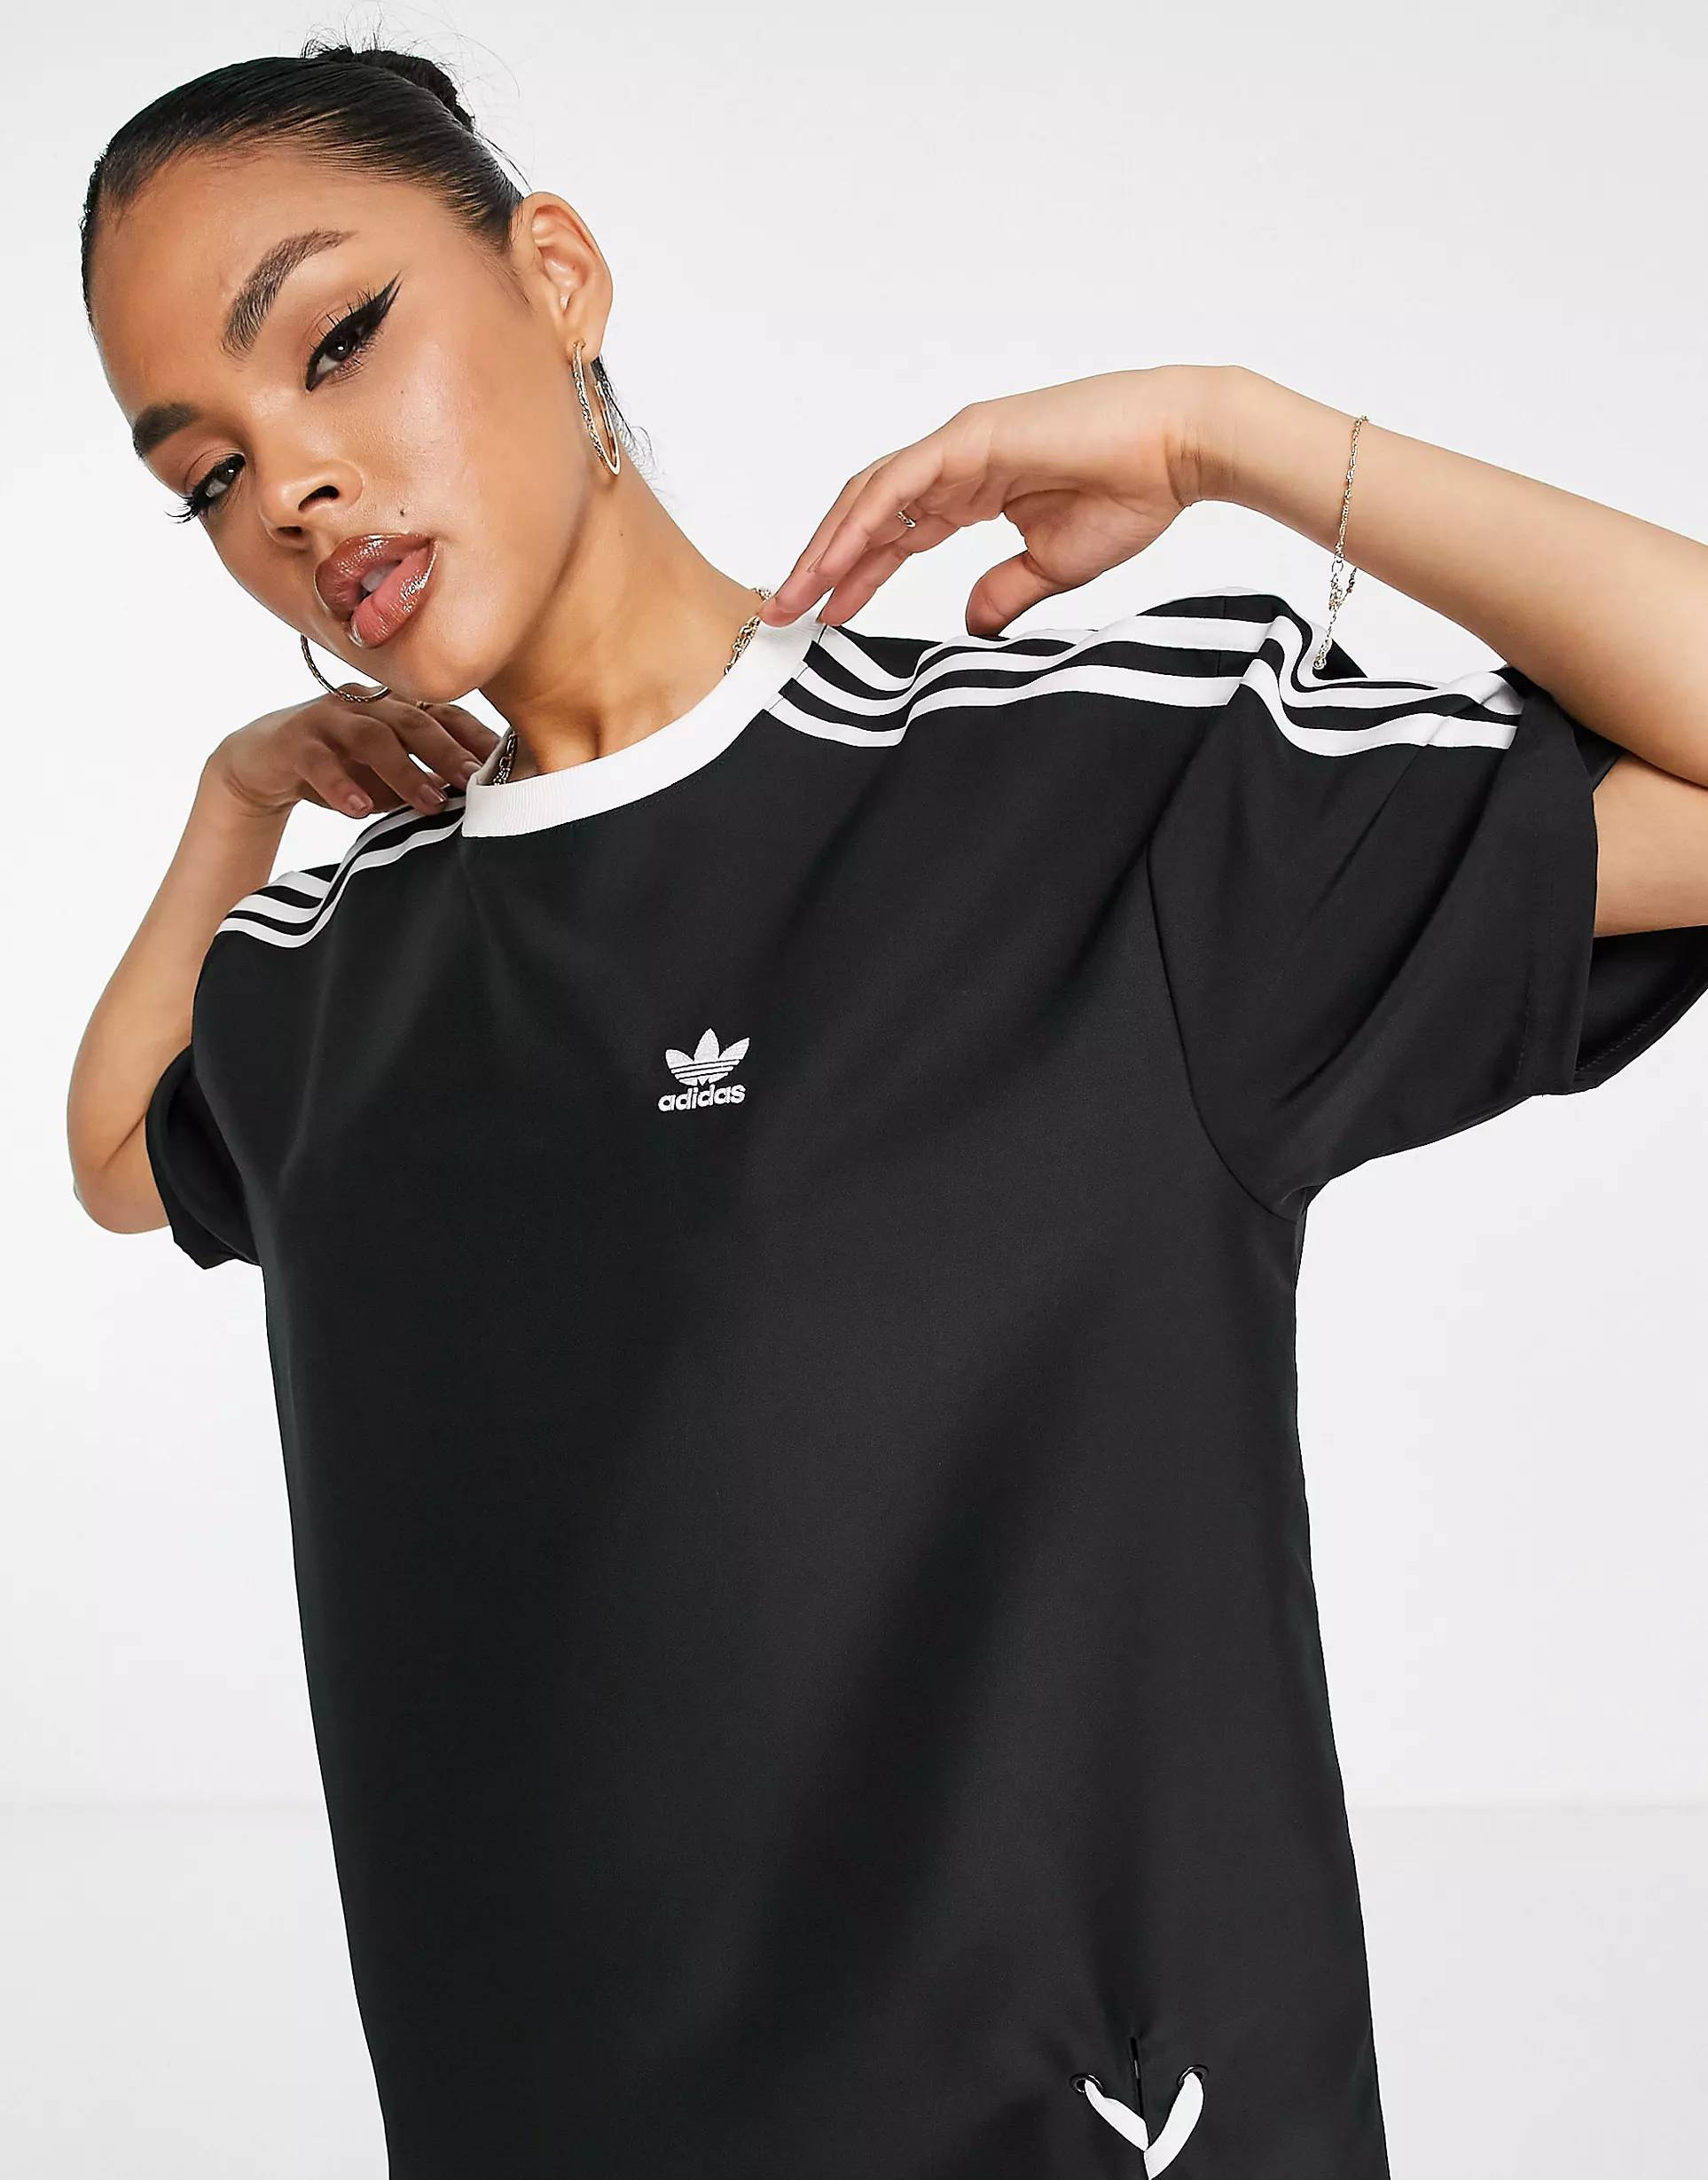 Buy To | T-Shirt Supplier Where Original\' adidas \'Always | Dress Sole The